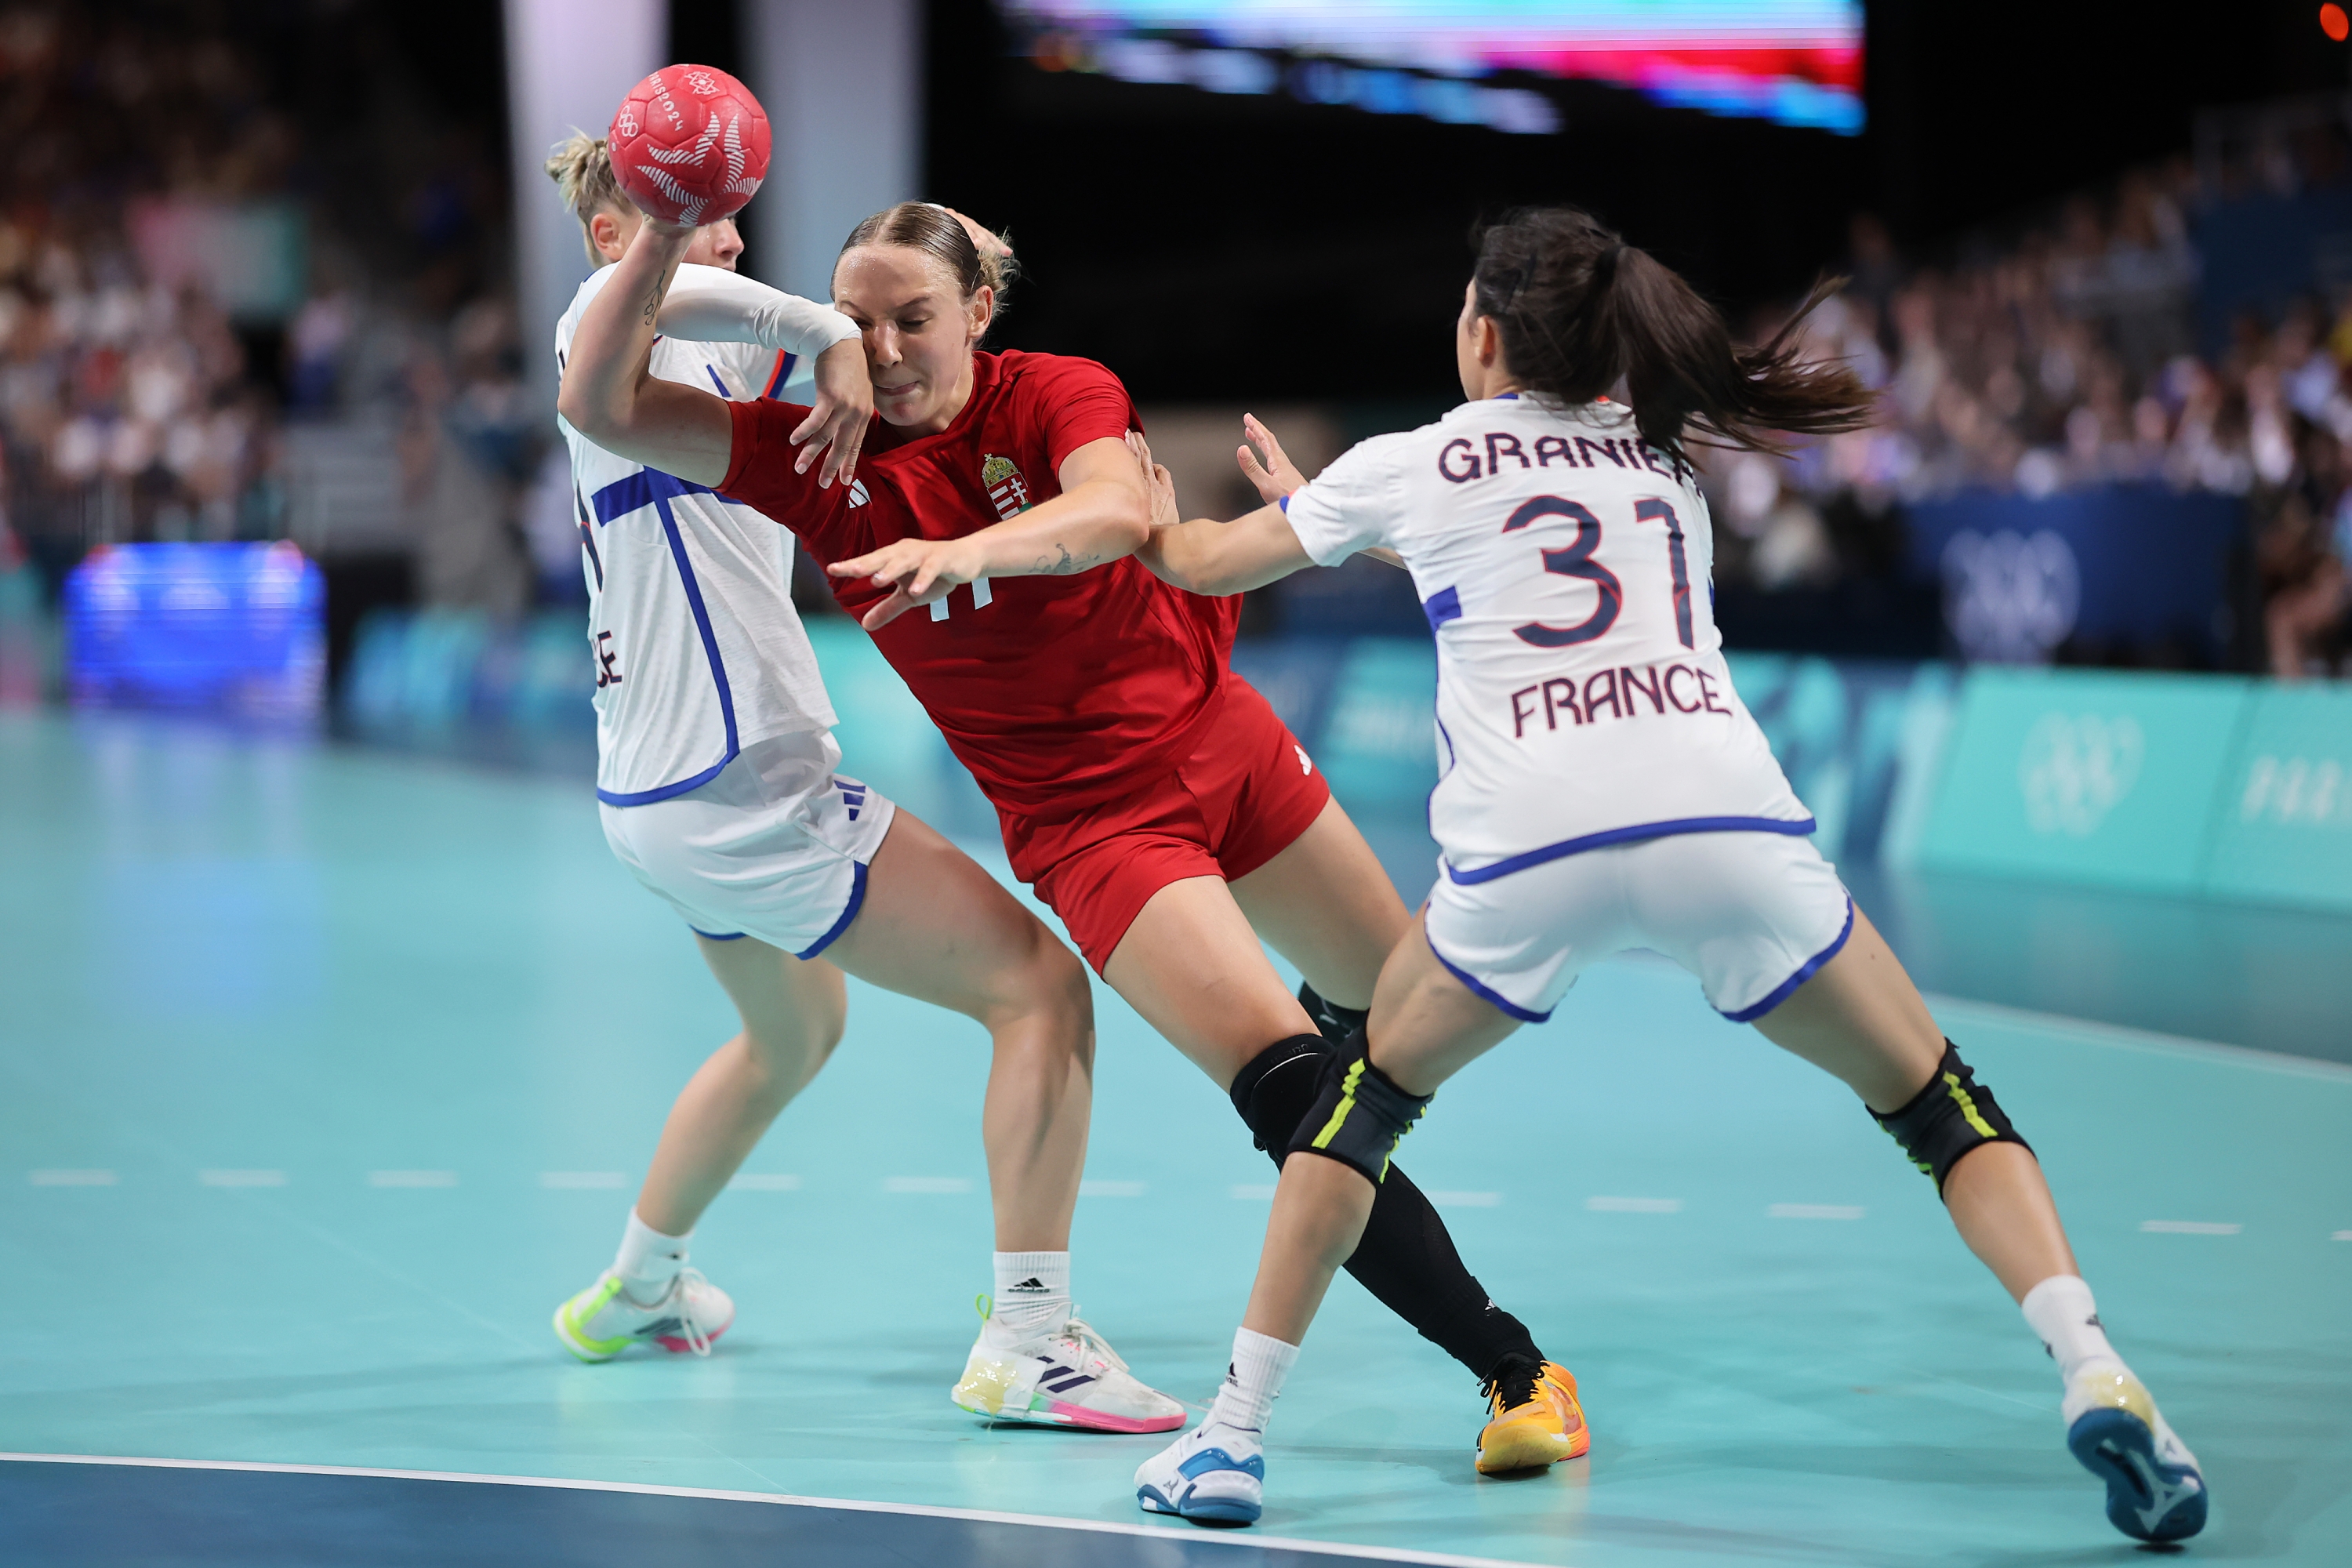 PARIS, FRANCE - JULY 25: Petra Simon #77 of Team Hungary shoots at the goal past Lucie Granier #3 of Team France during the Women's Handball Group B match between Hungary and France on Day -1 of the Olympic Games Paris 2024 at South Paris Arena on July 25, 2024 in Paris, France. (Photo by Hector Vivas/Getty Images)